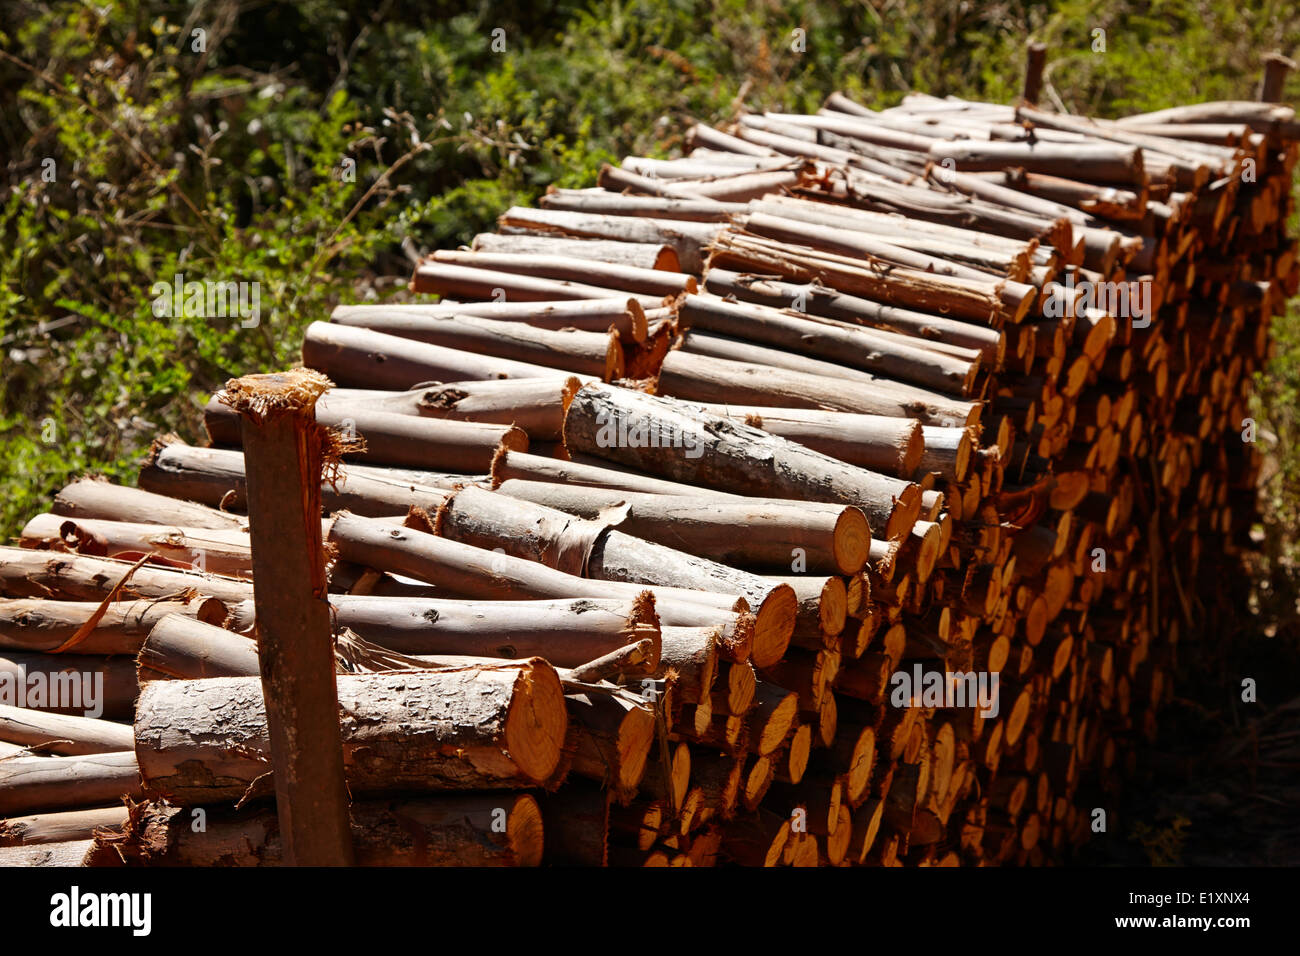 cut logs stacked for fuel eucalyptus forest los pellines chile Stock Photo